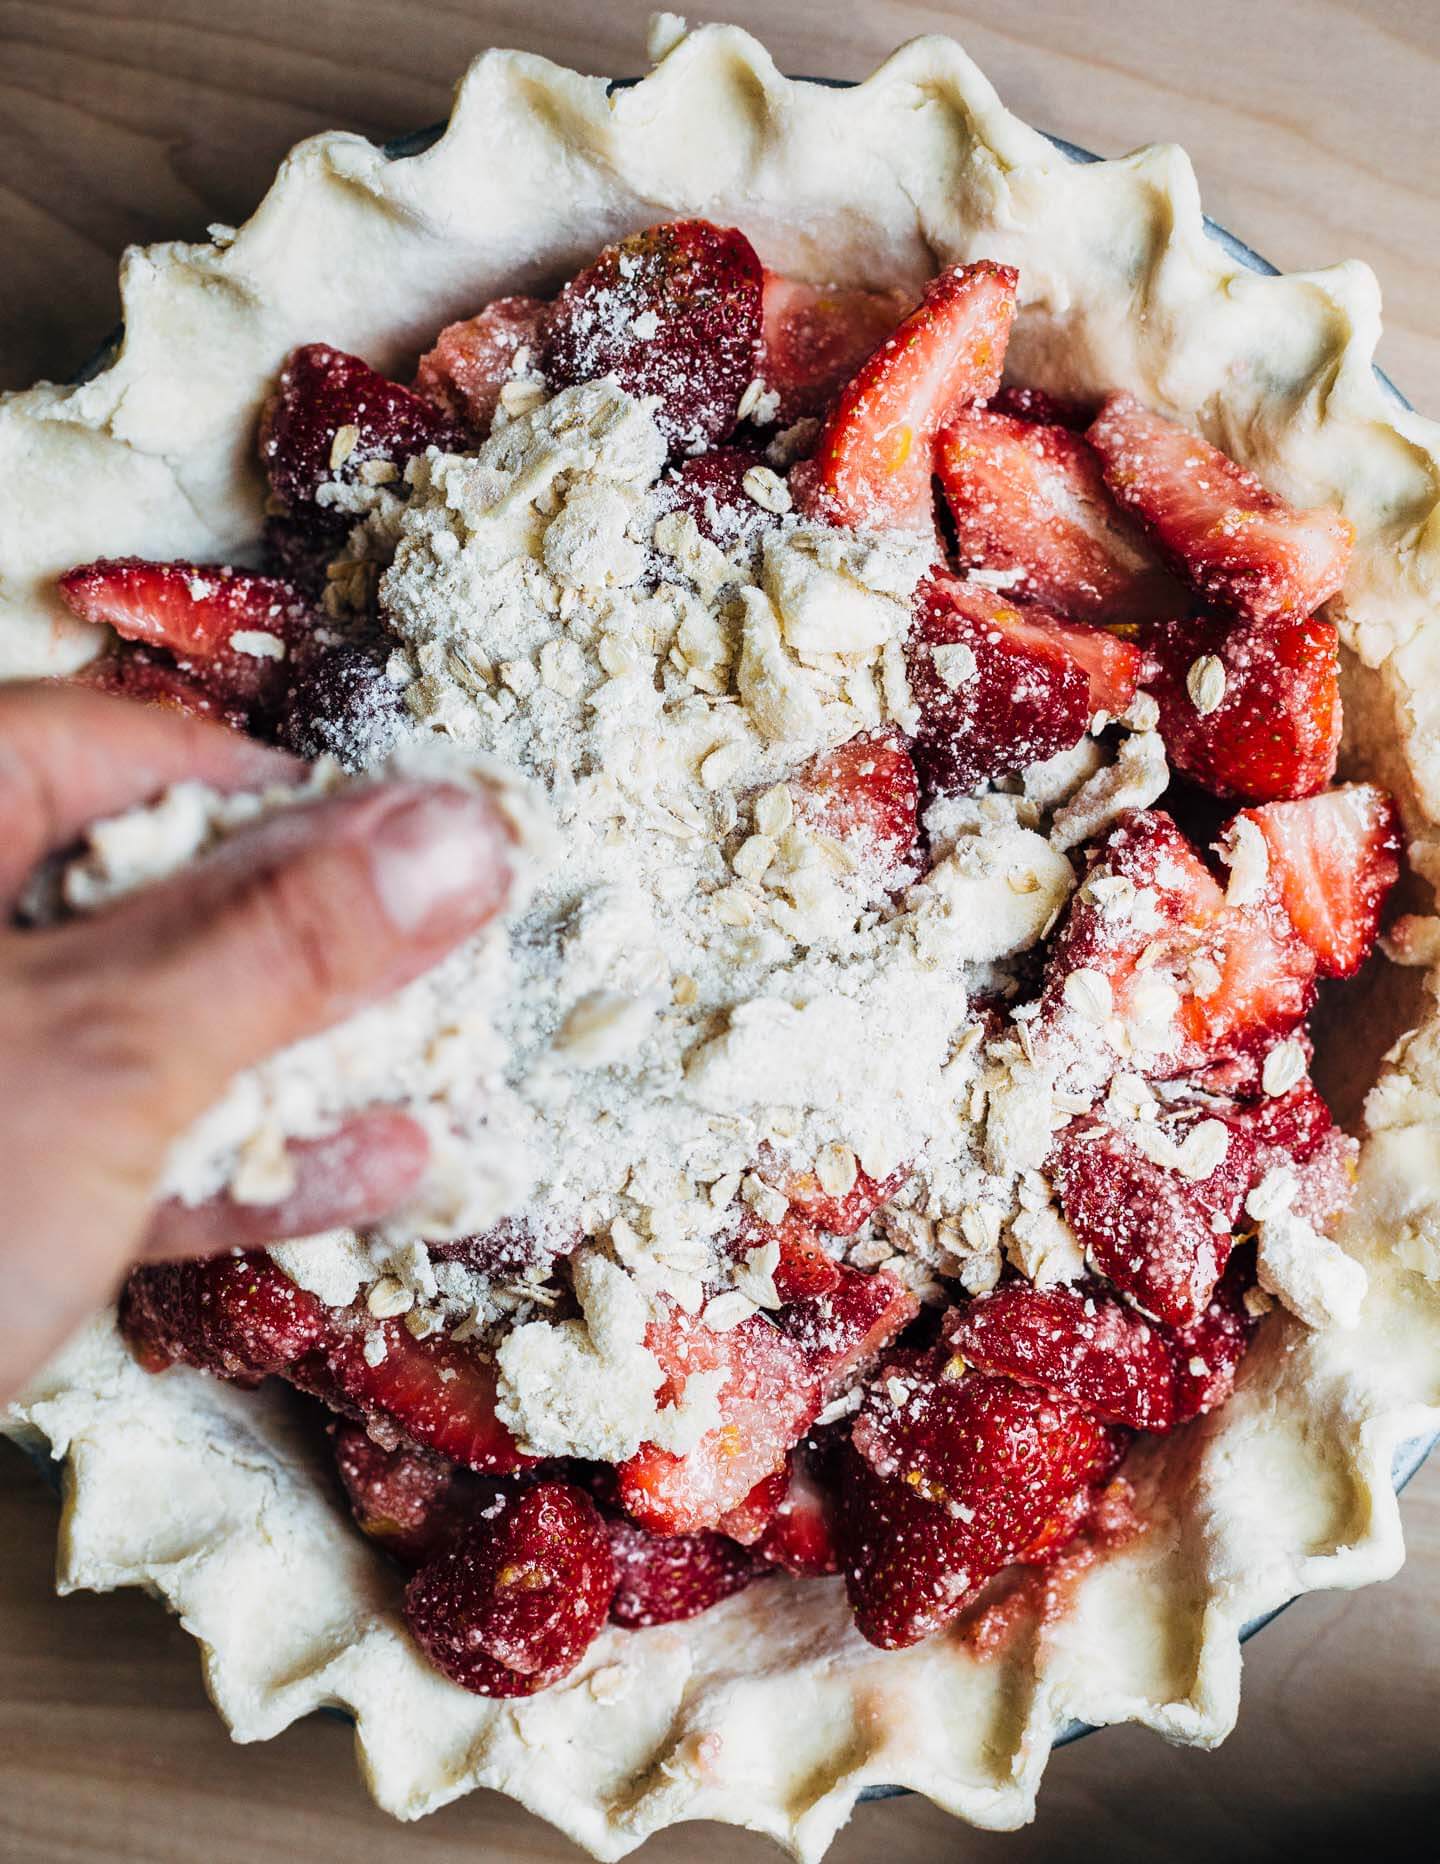 A supremely delicious strawberry crumble pie with all the jammy sweetness of in-season strawberries and a toothsome buttery oat crumble topping. 